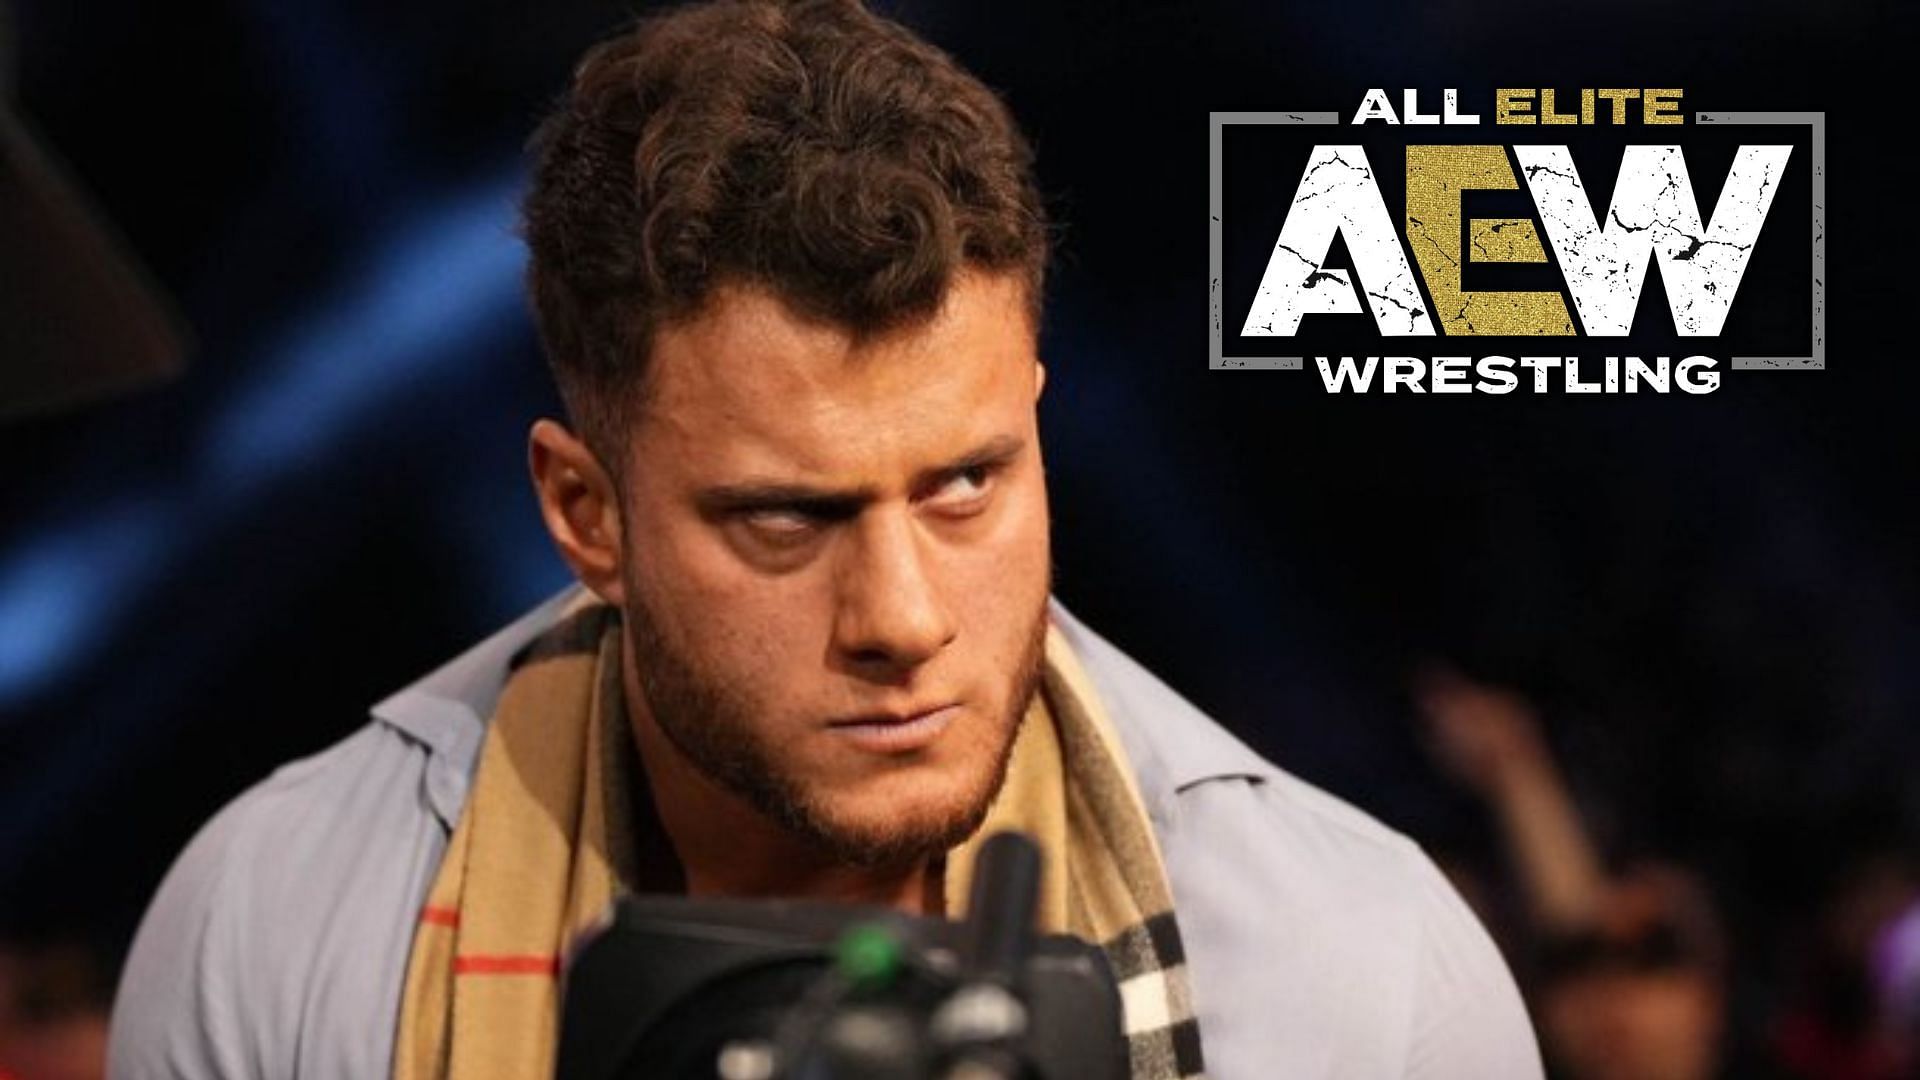 MJF is scheduled to have a match at Revolution pay-per-view